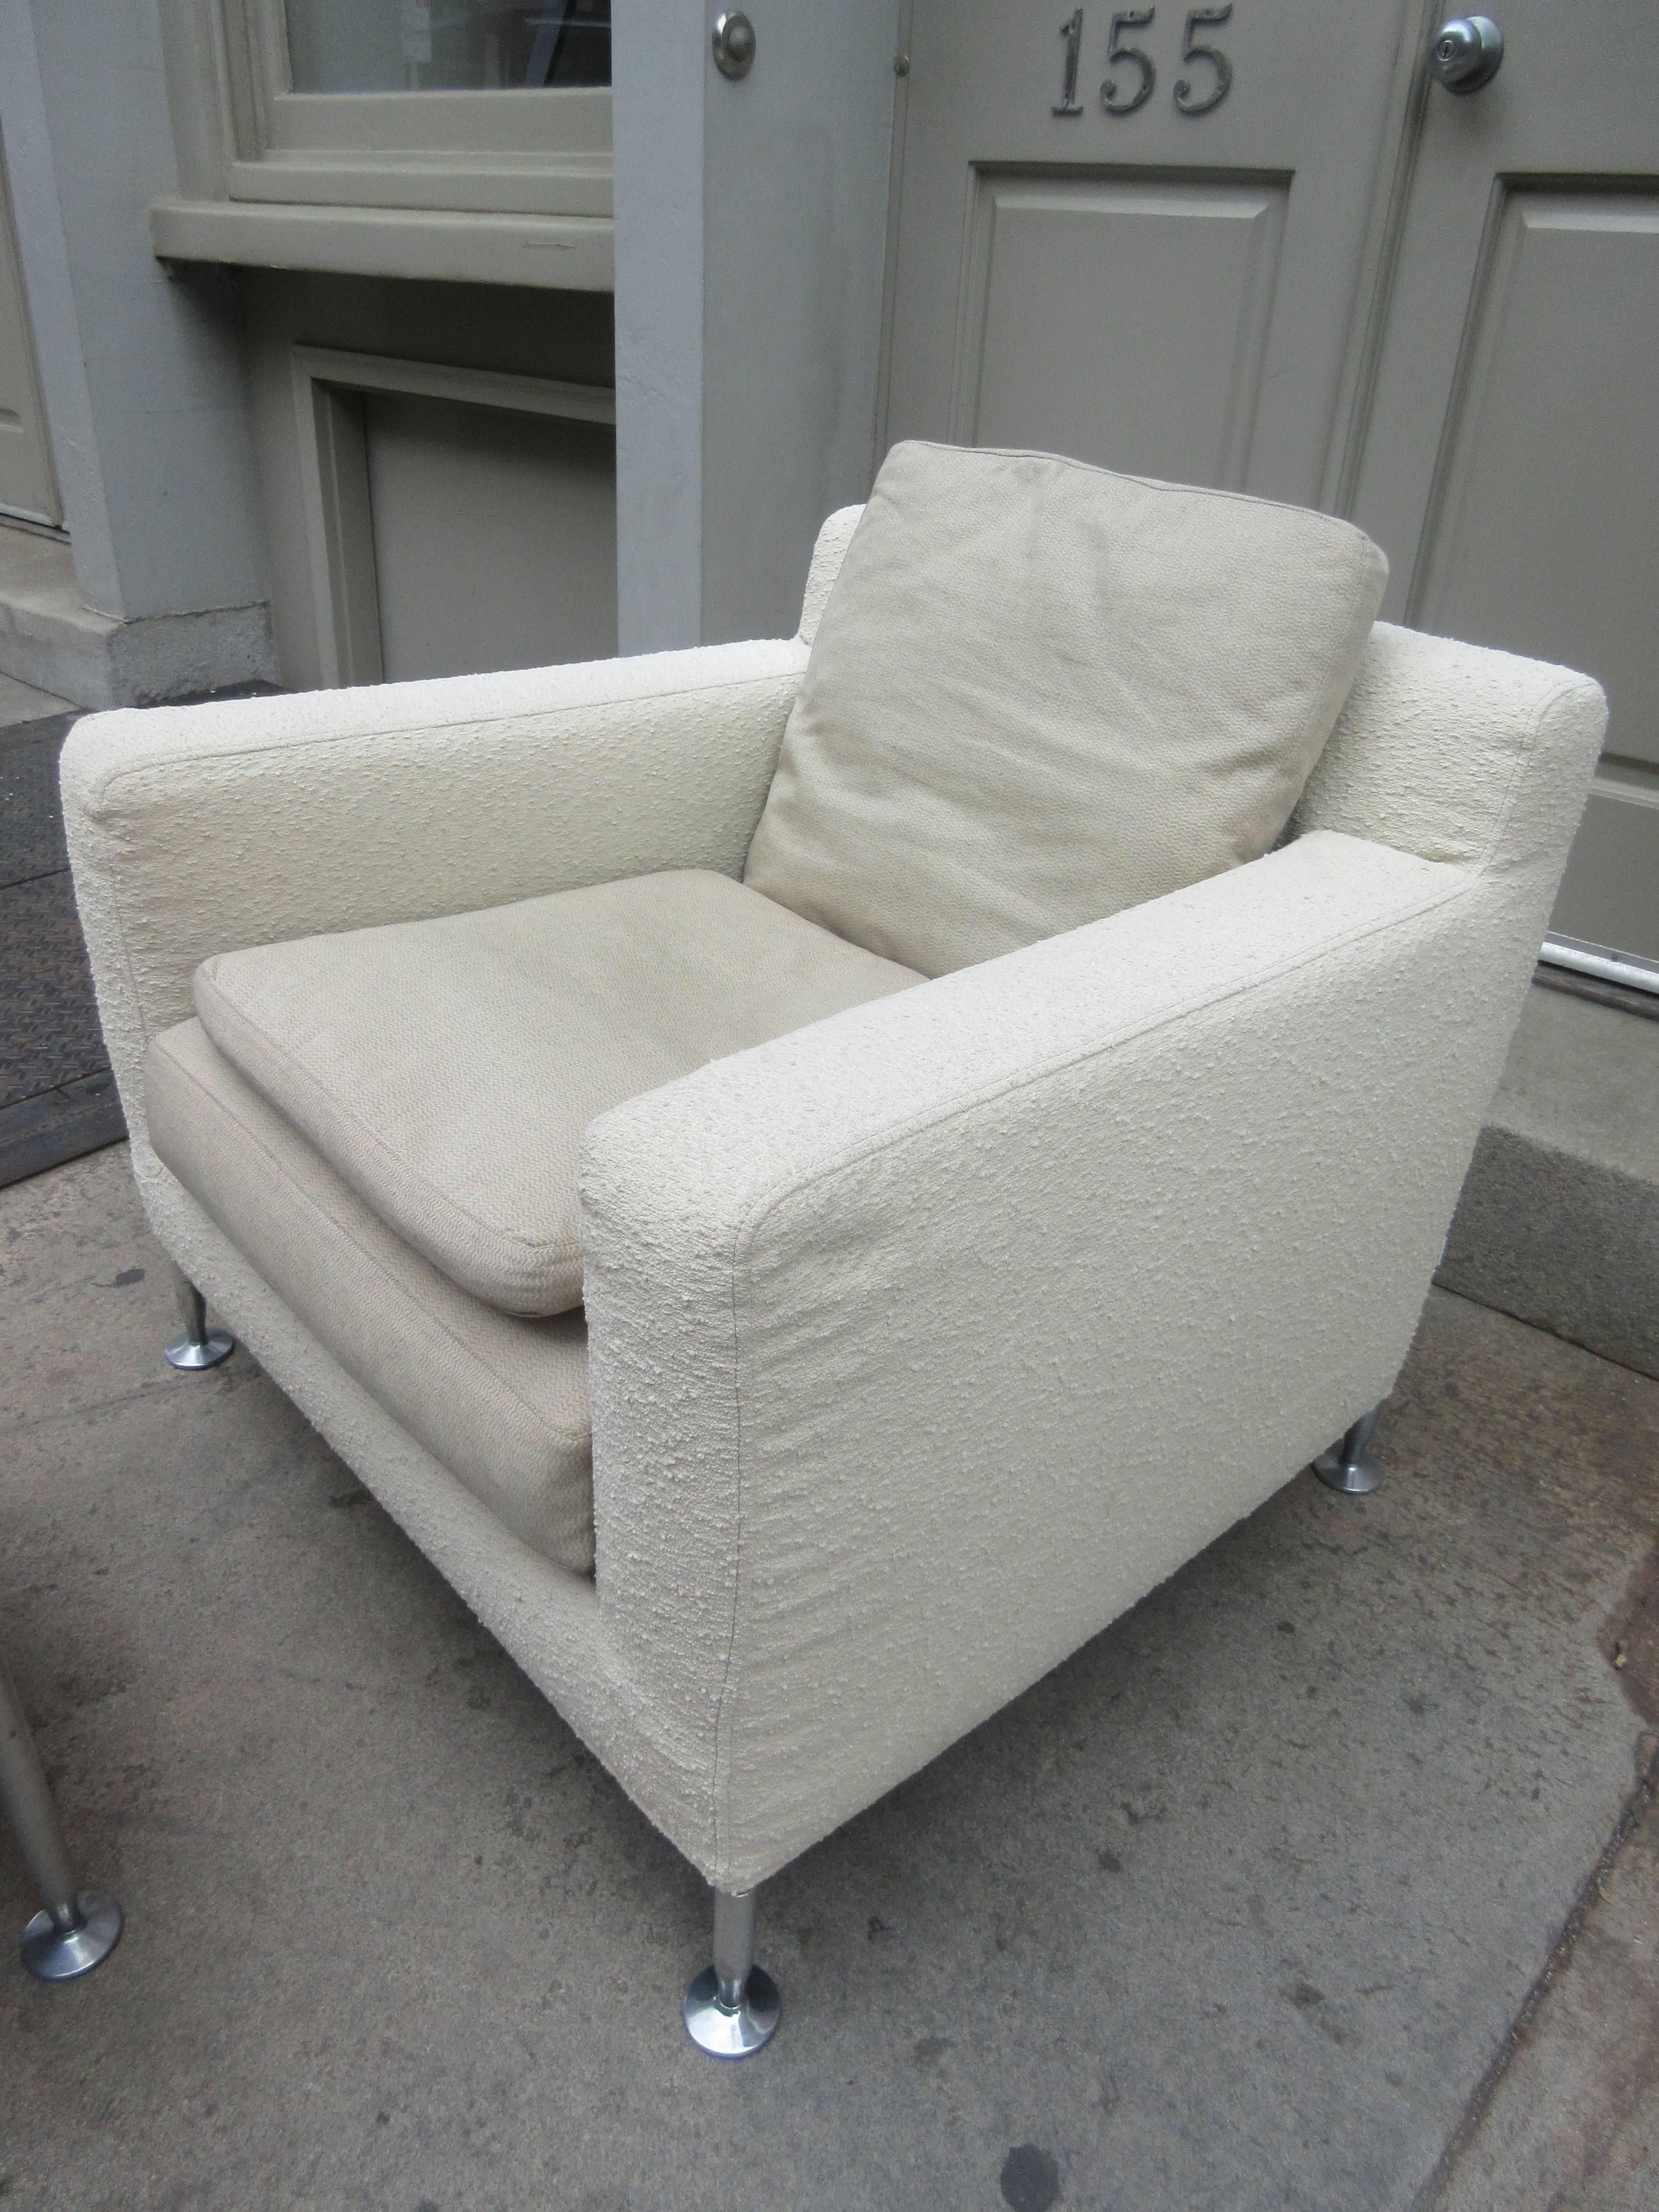 Antonio Citterio for B&B Italia Harry lounge chair and ottoman in a rough off-white bouclé and three loose cushions on chrome legs. Retains its tags. Comfortable contemporary seating. Ottoman is very diminutive 19 x 19 x 17, measurement listed